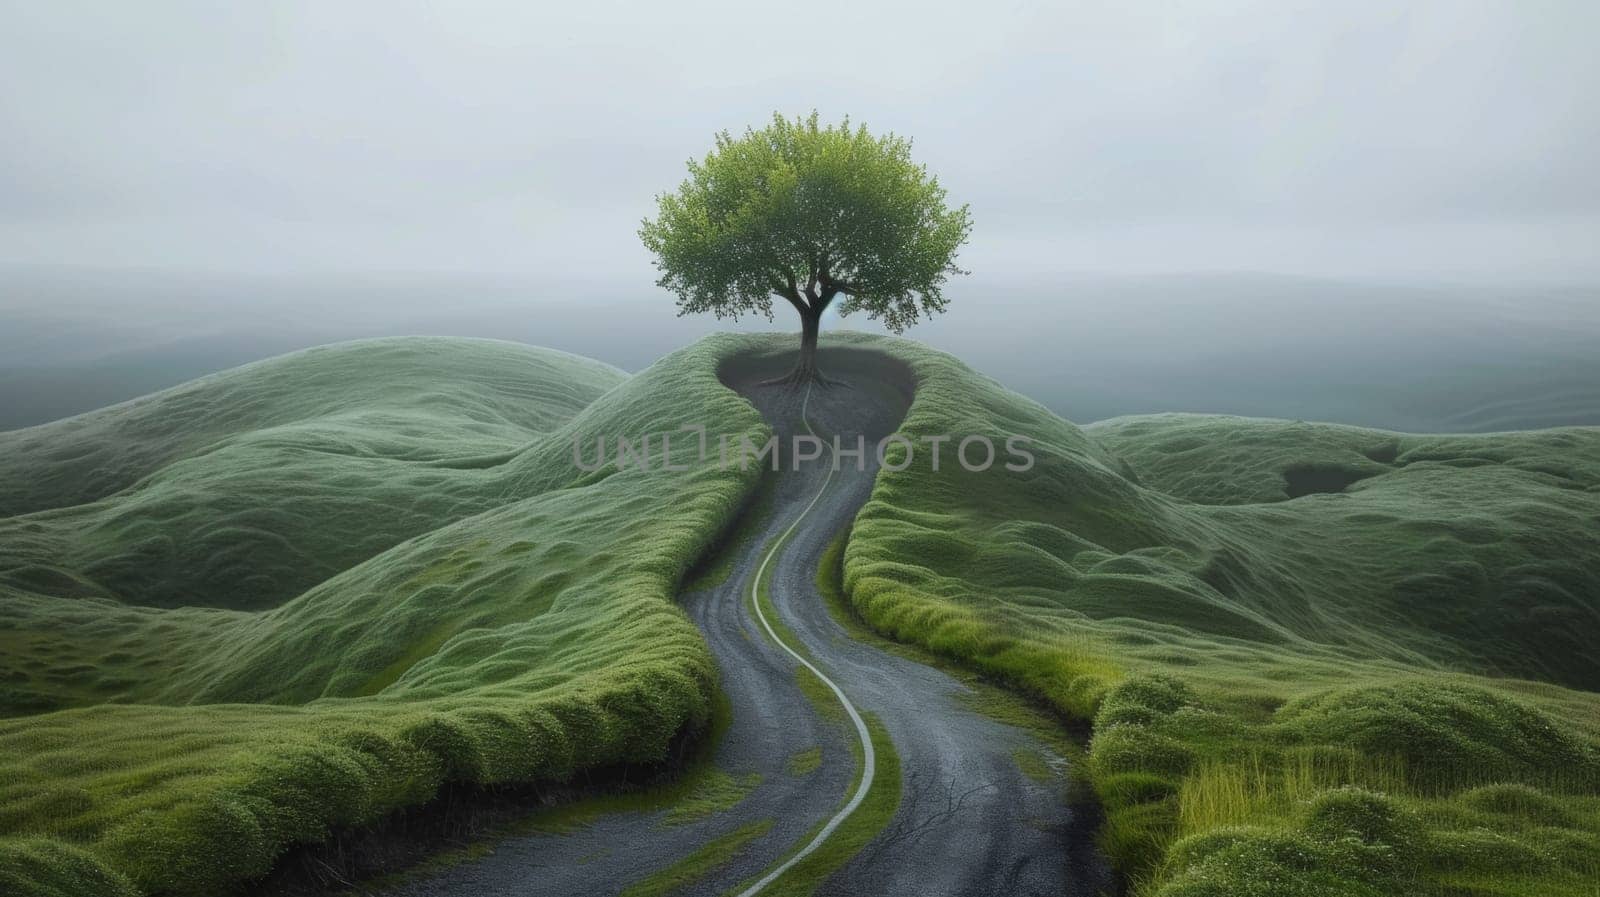 A tree is growing on a winding road in the middle of nowhere